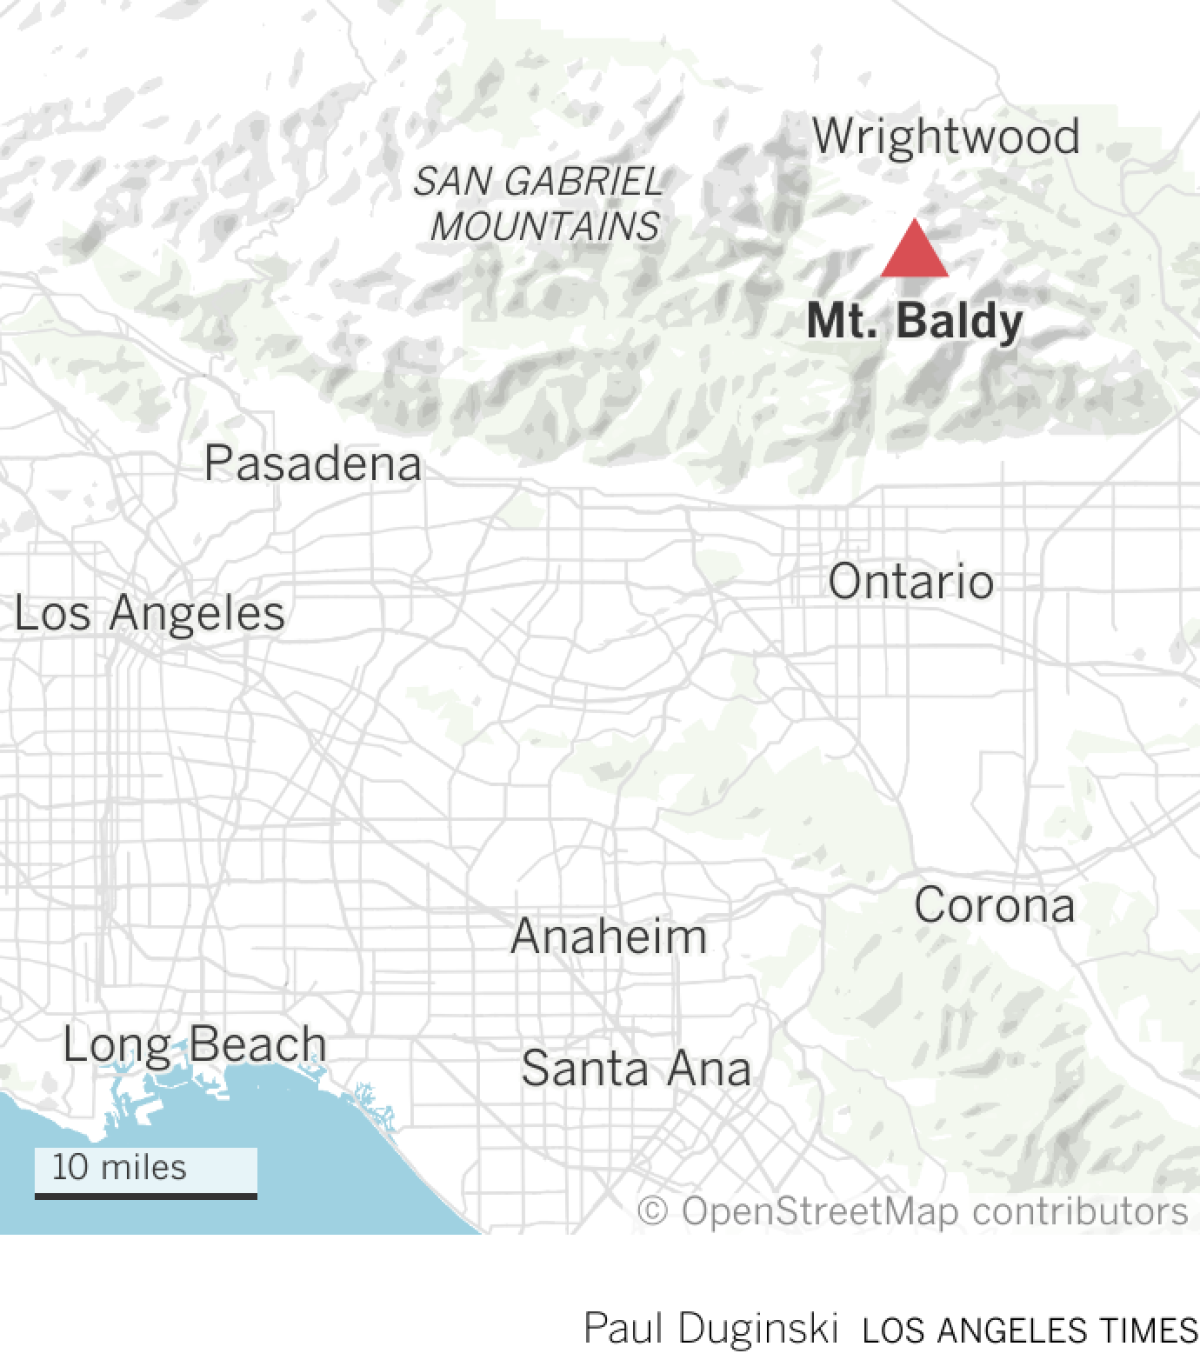 Locator map of Mt. Baldy in L.A. area.